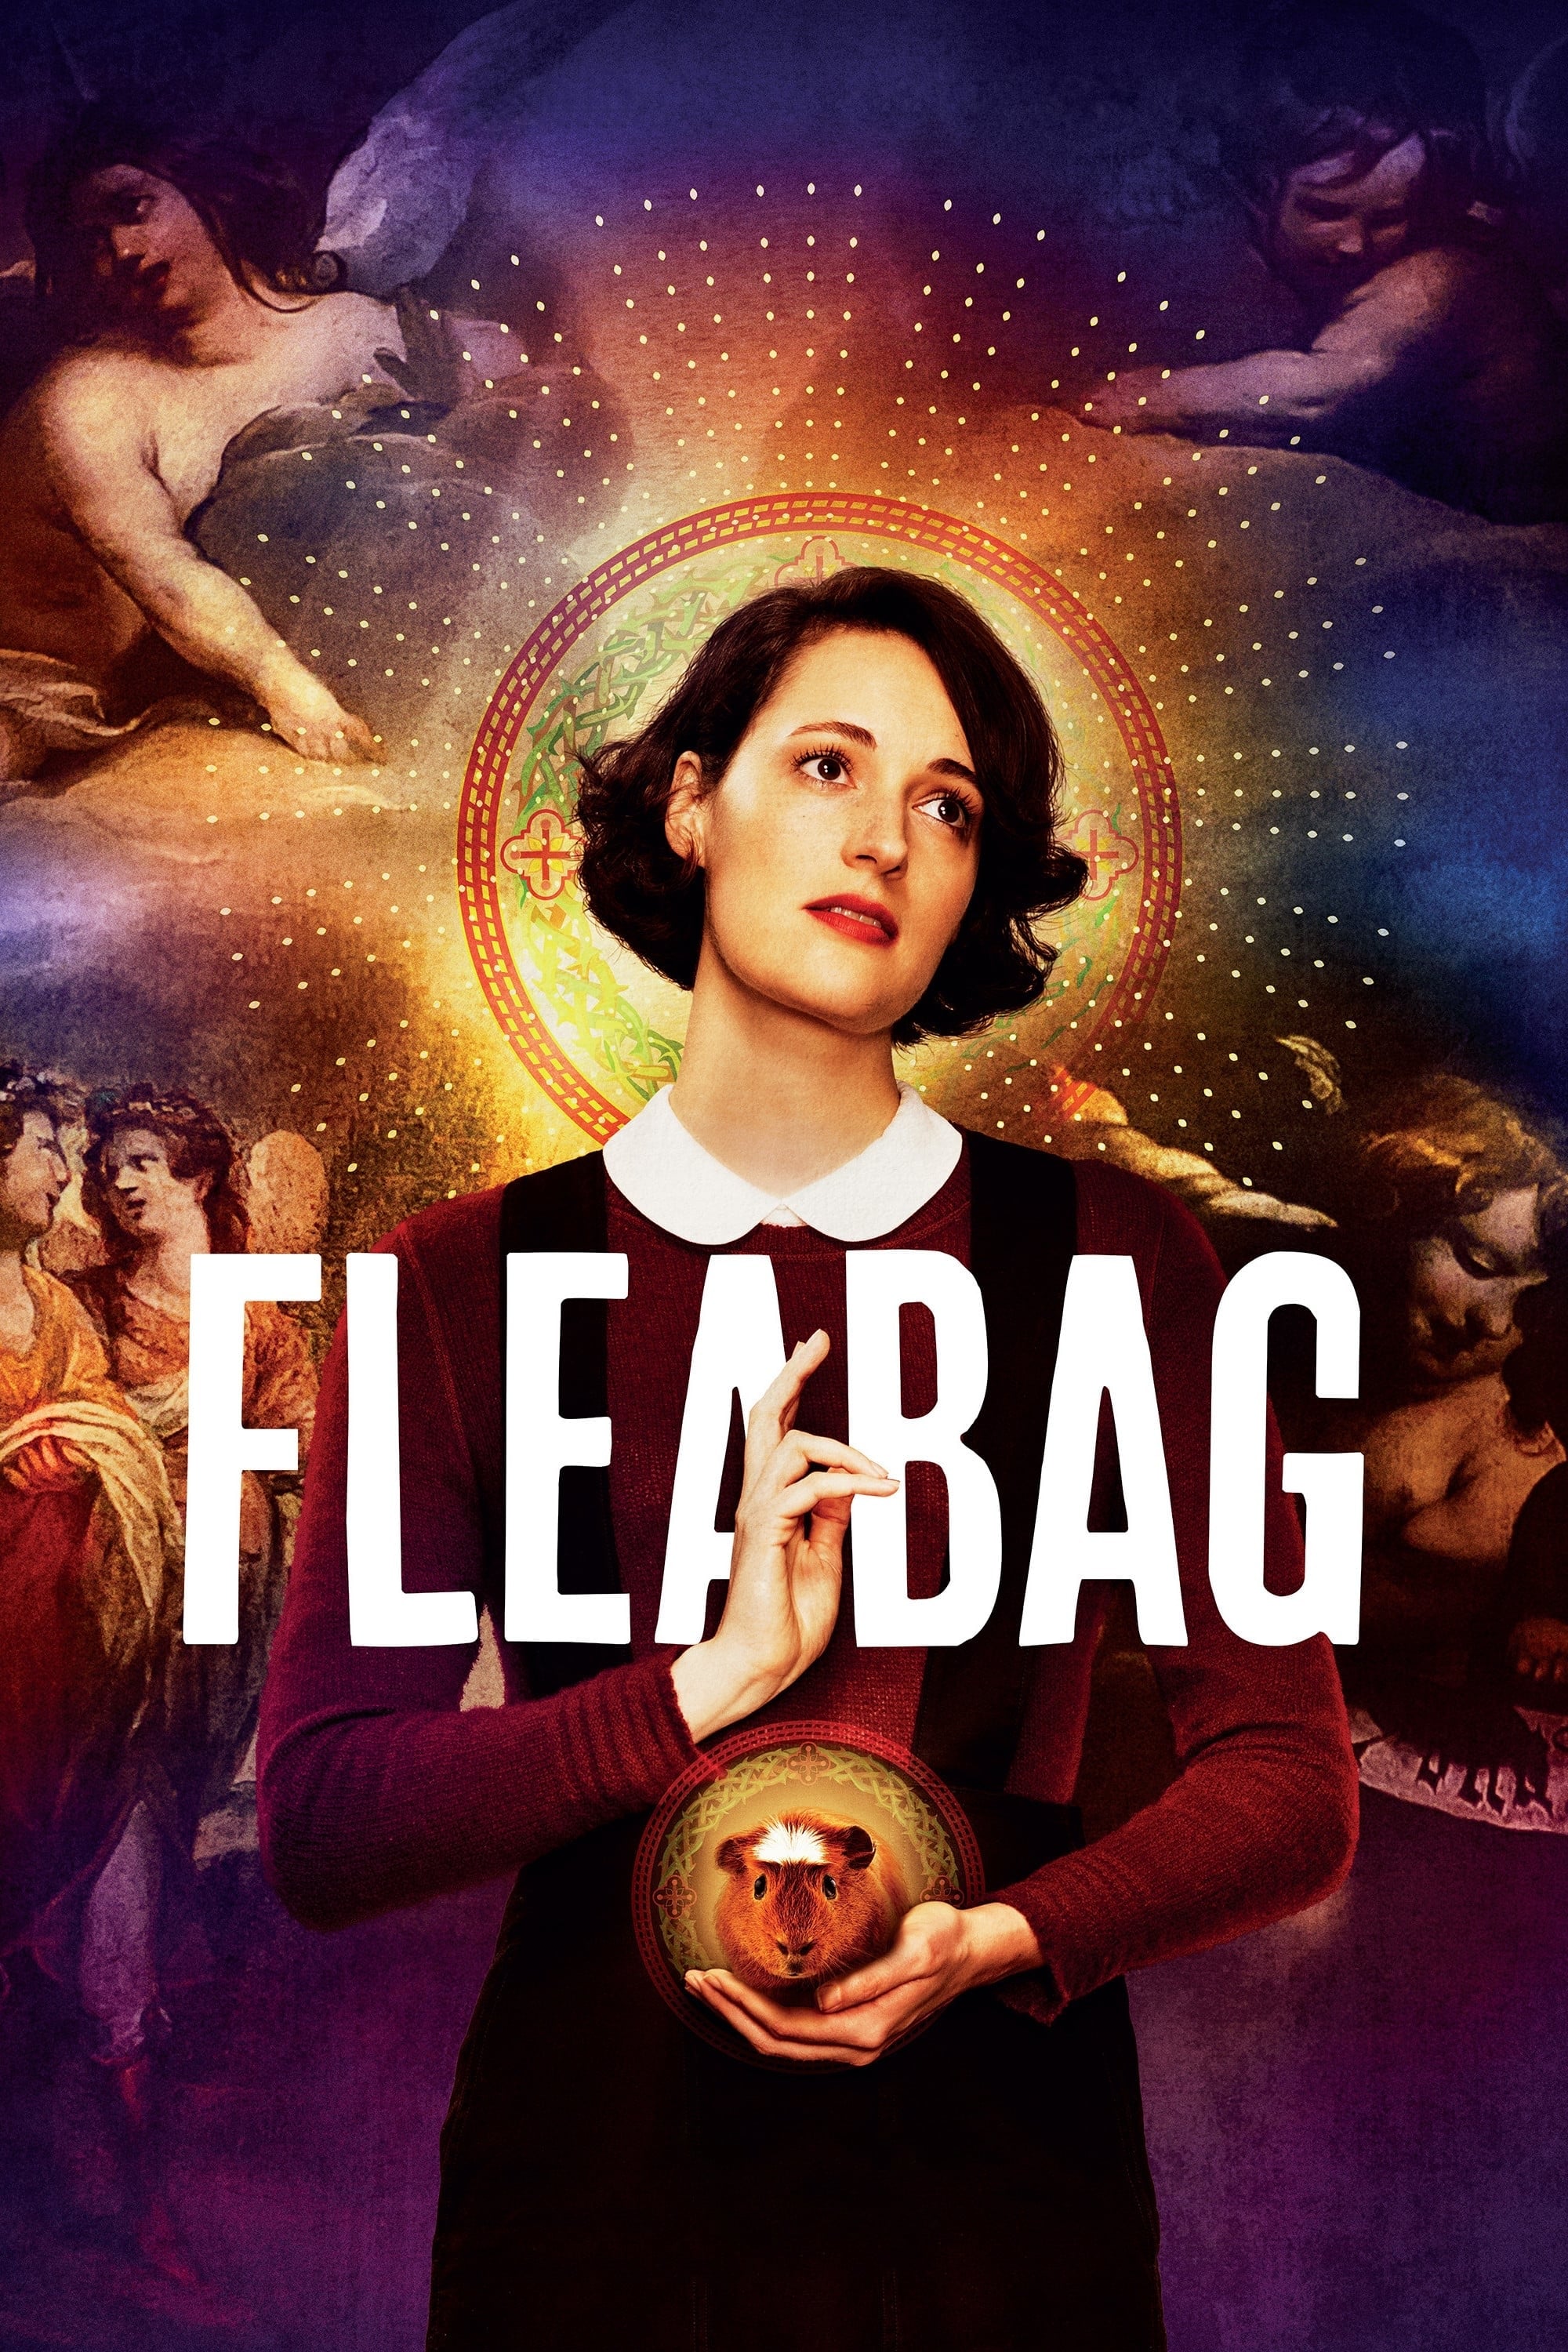 Fleabag TV Shows About Father Daughter Relationship